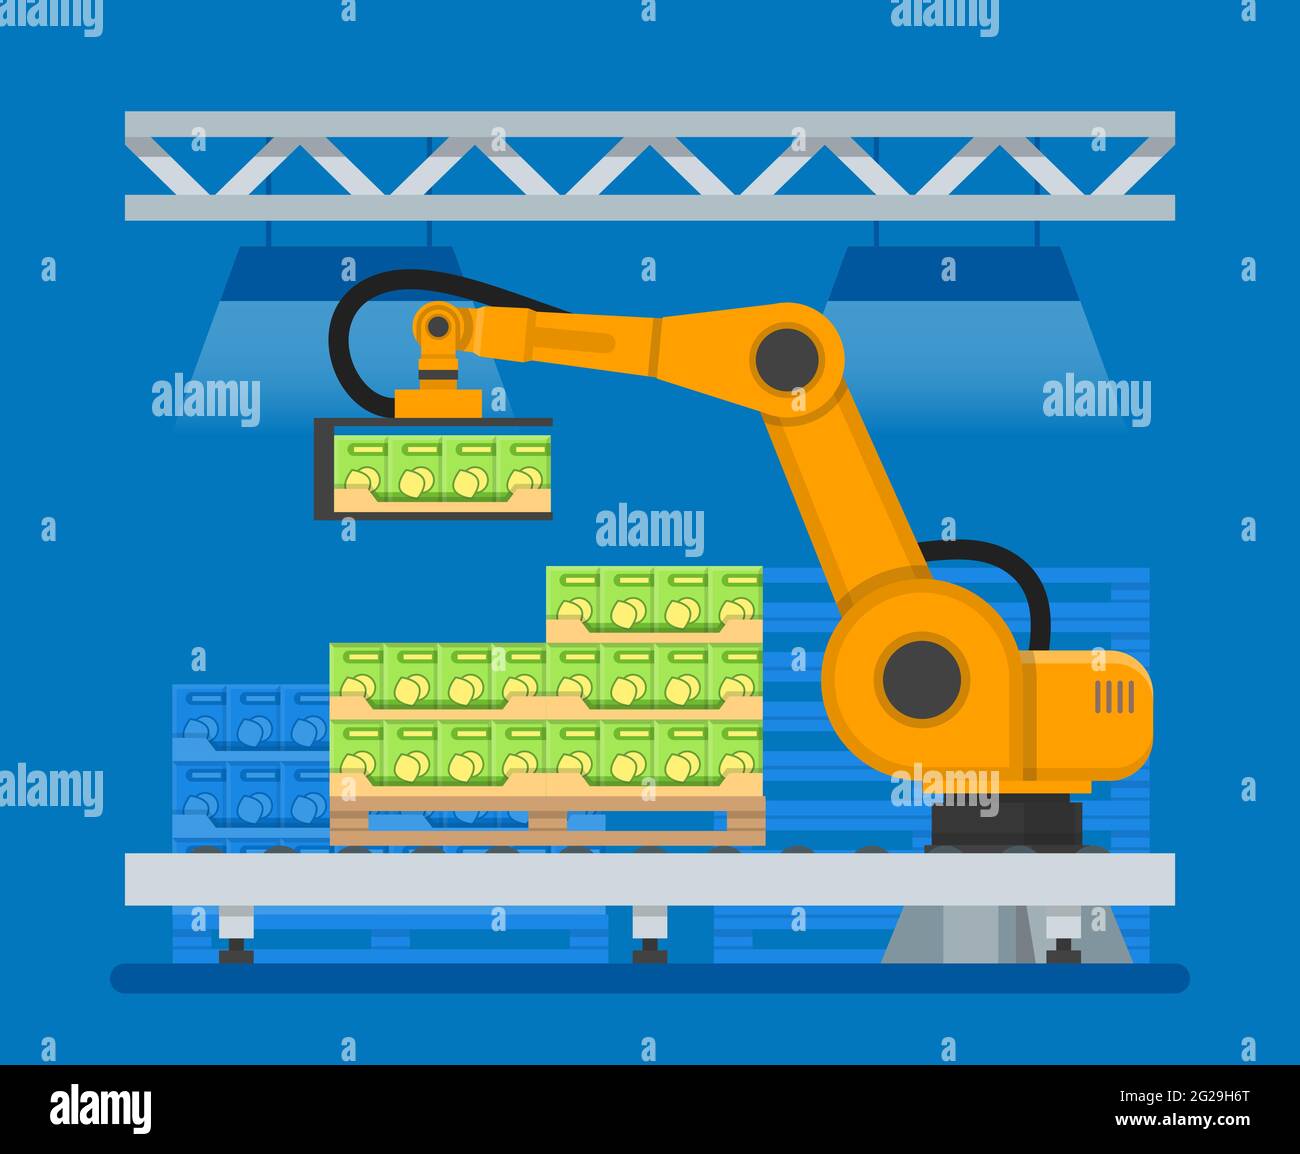 Vector illustration of industrial robots for palletizing food products Stock Vector